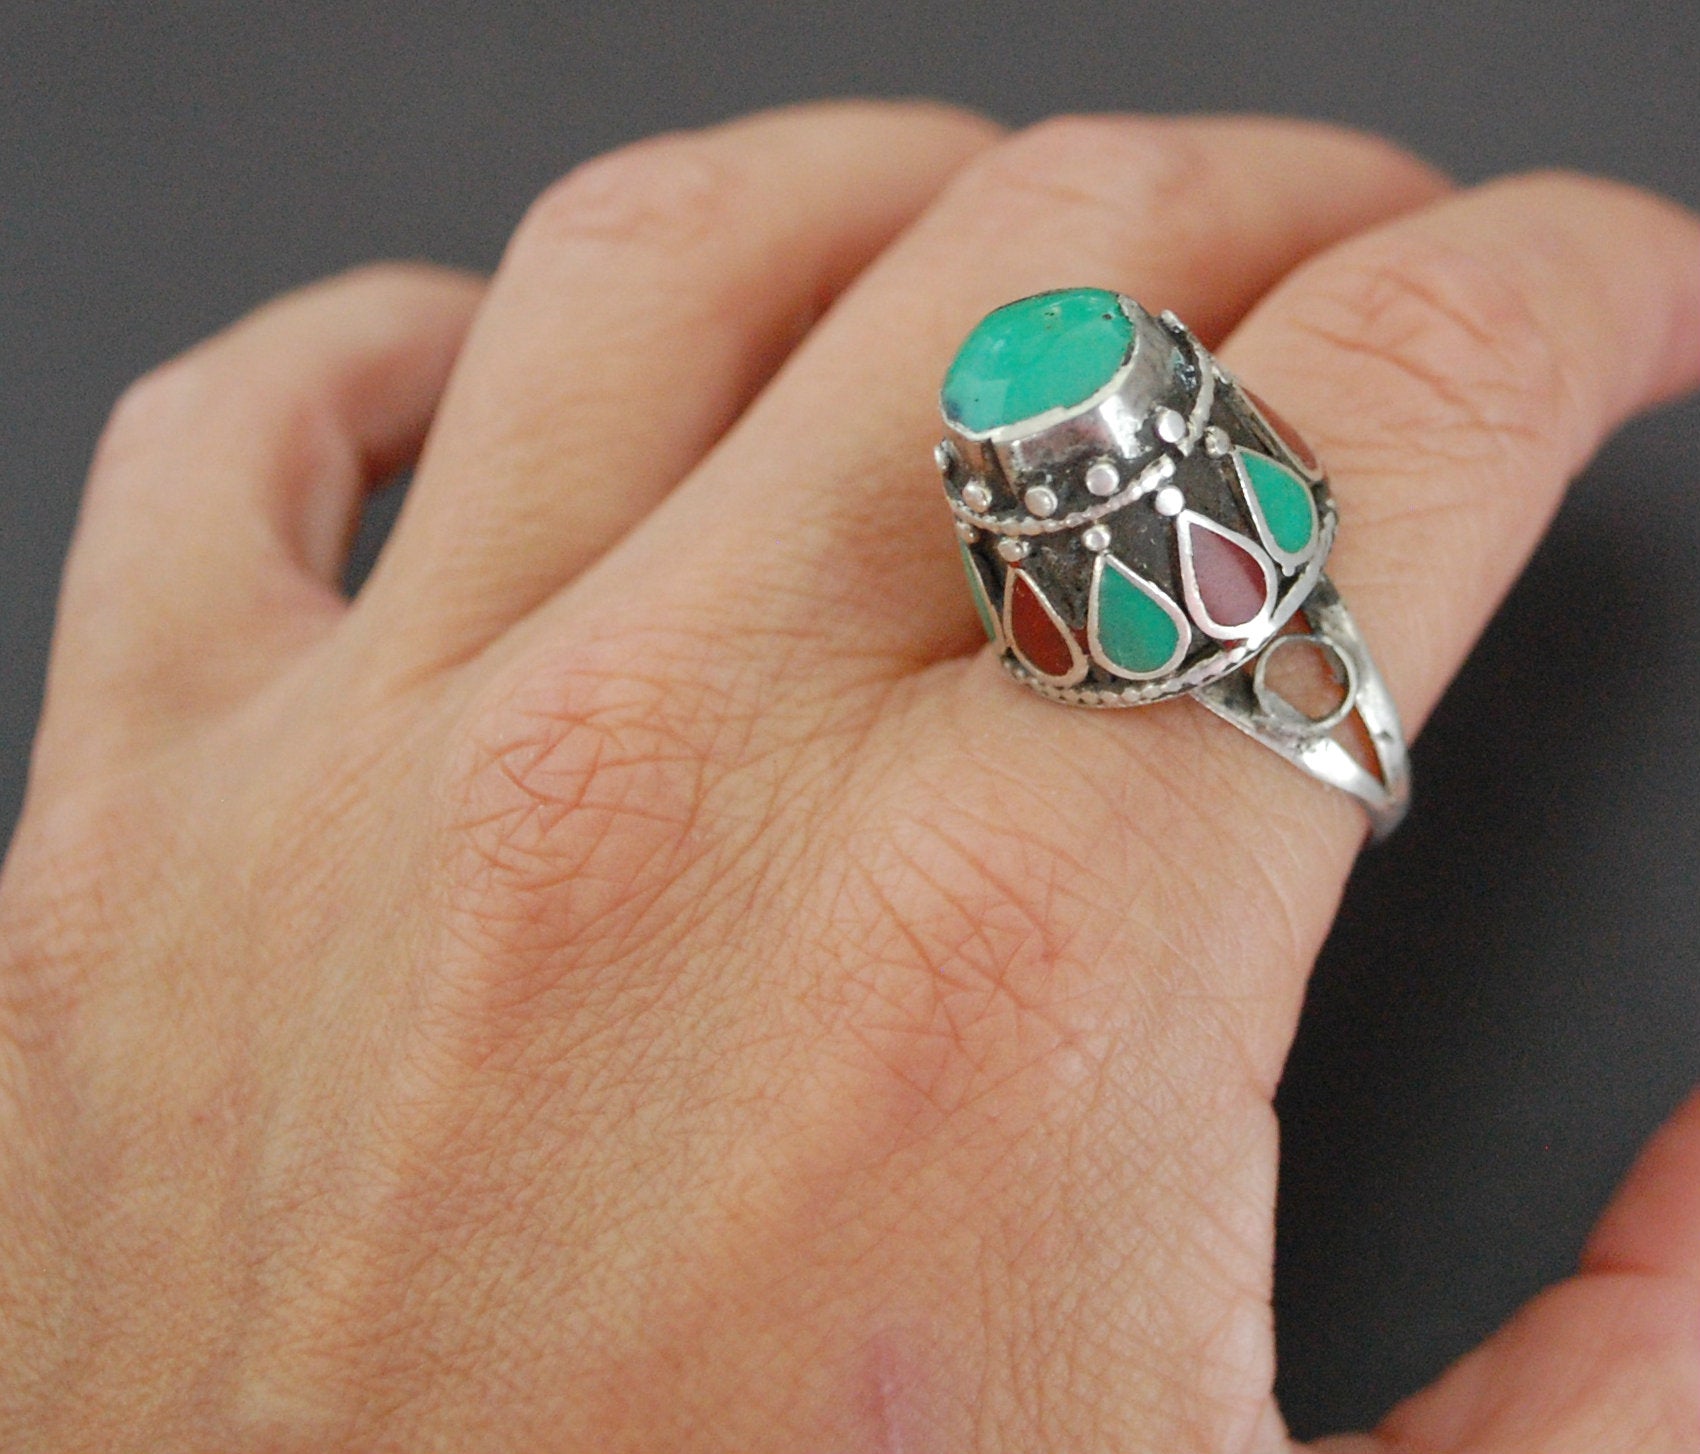 Afghani Carnelian Turquoise Dome Ring - Size 10